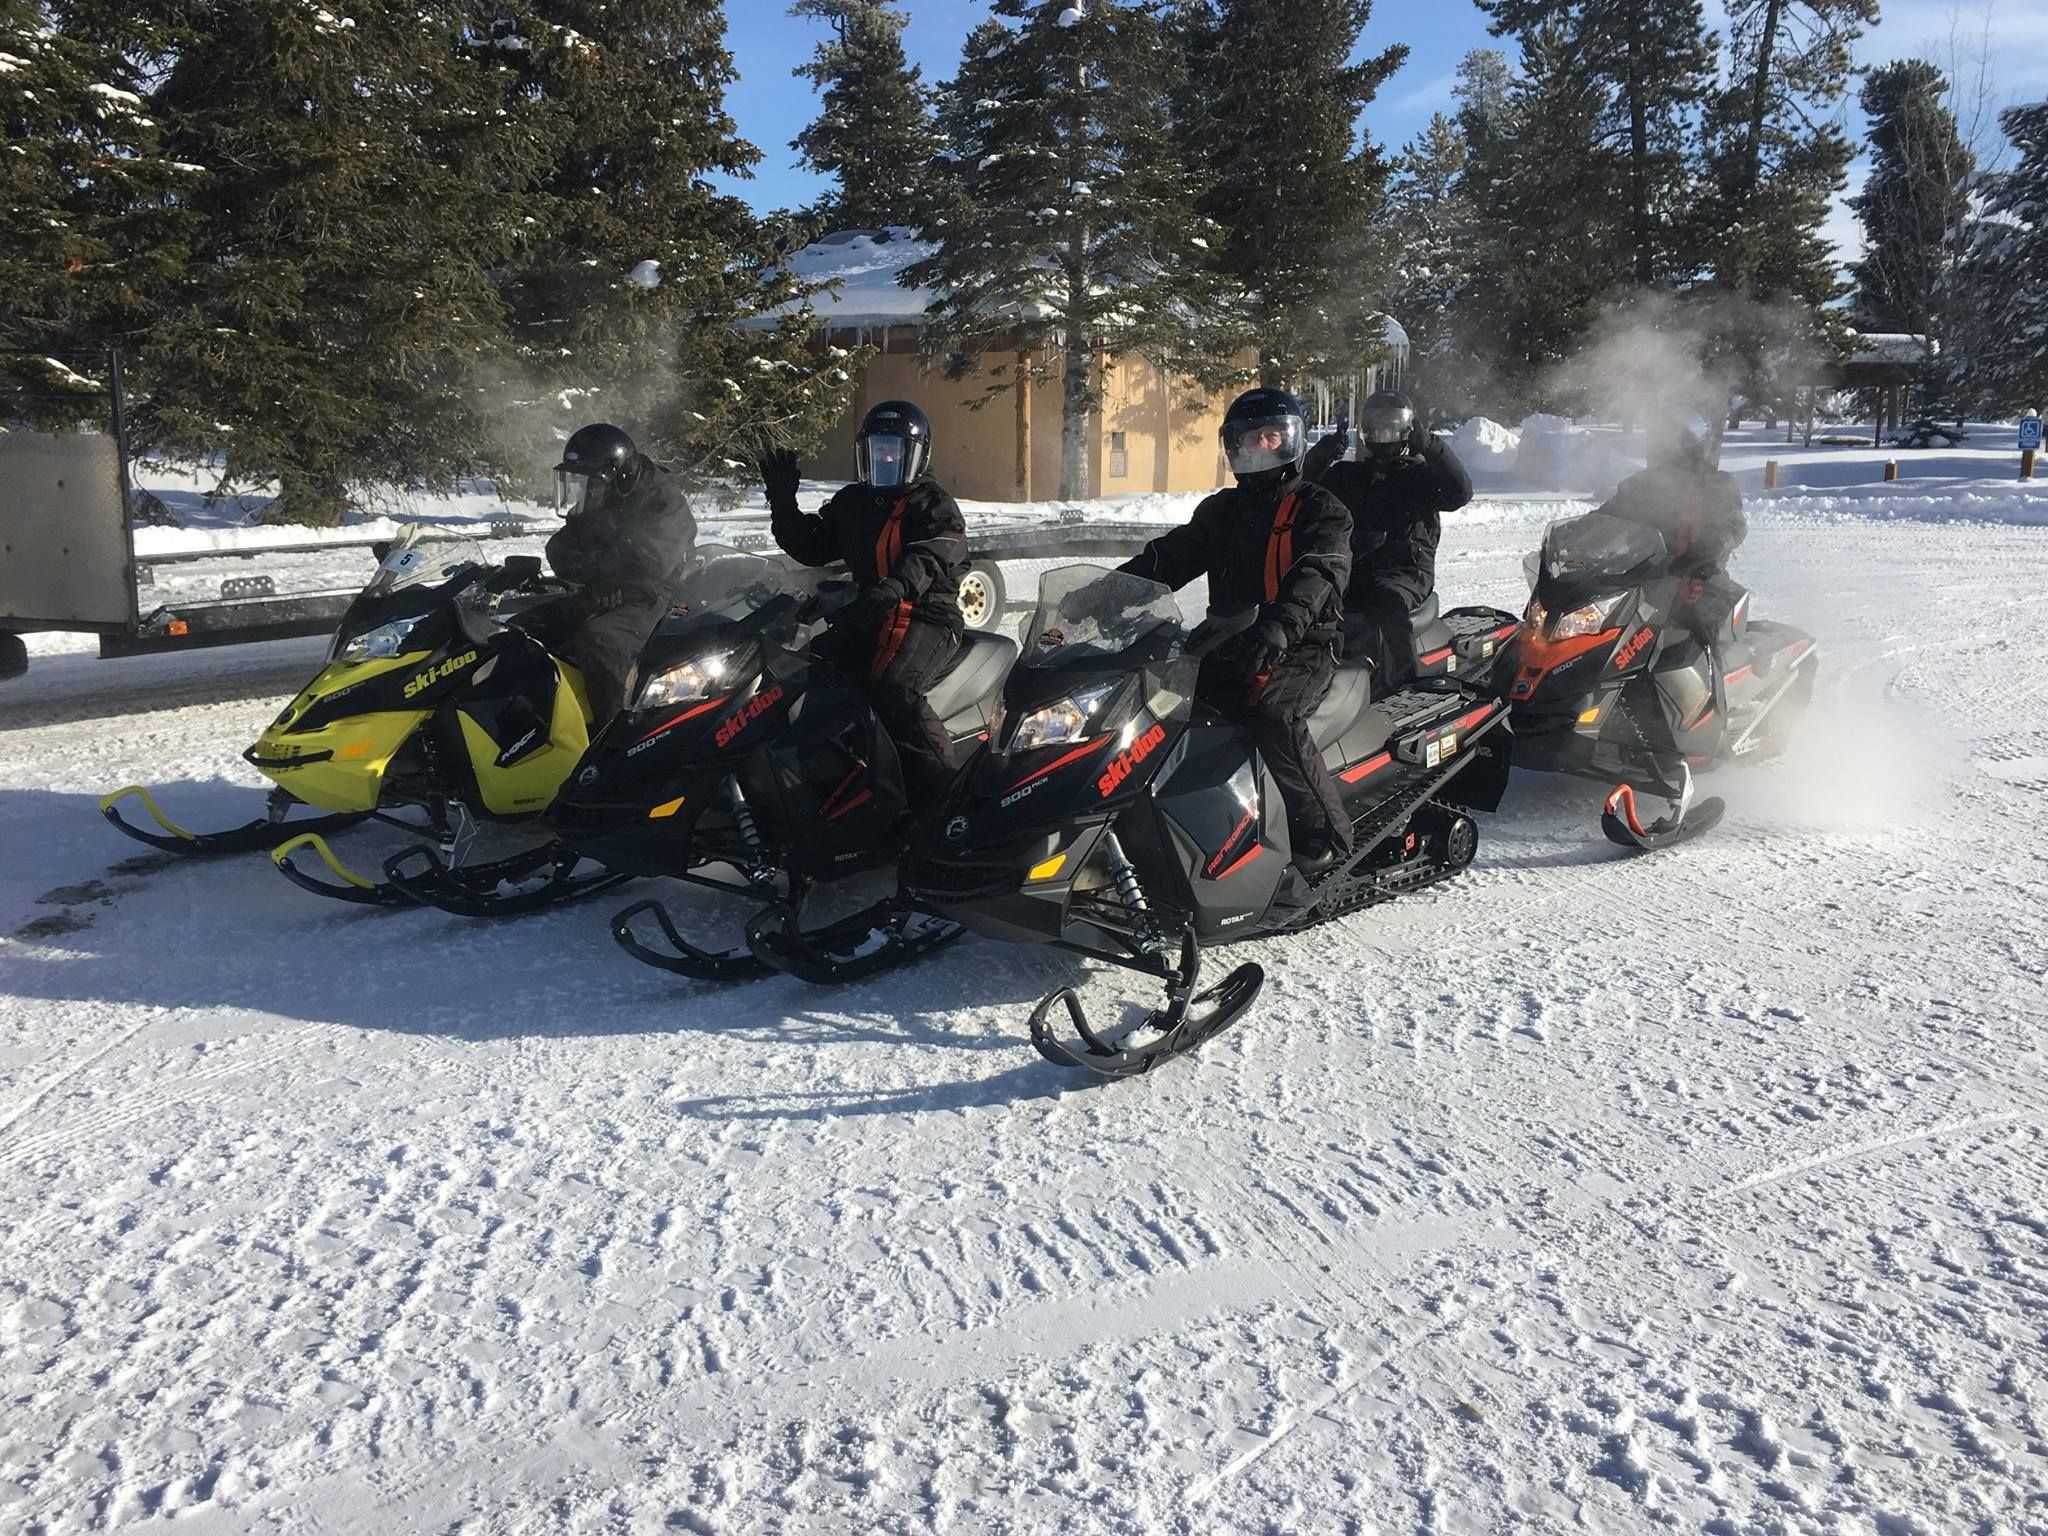 Discover Winter Bliss with Teton Valley Snowmobile Tours